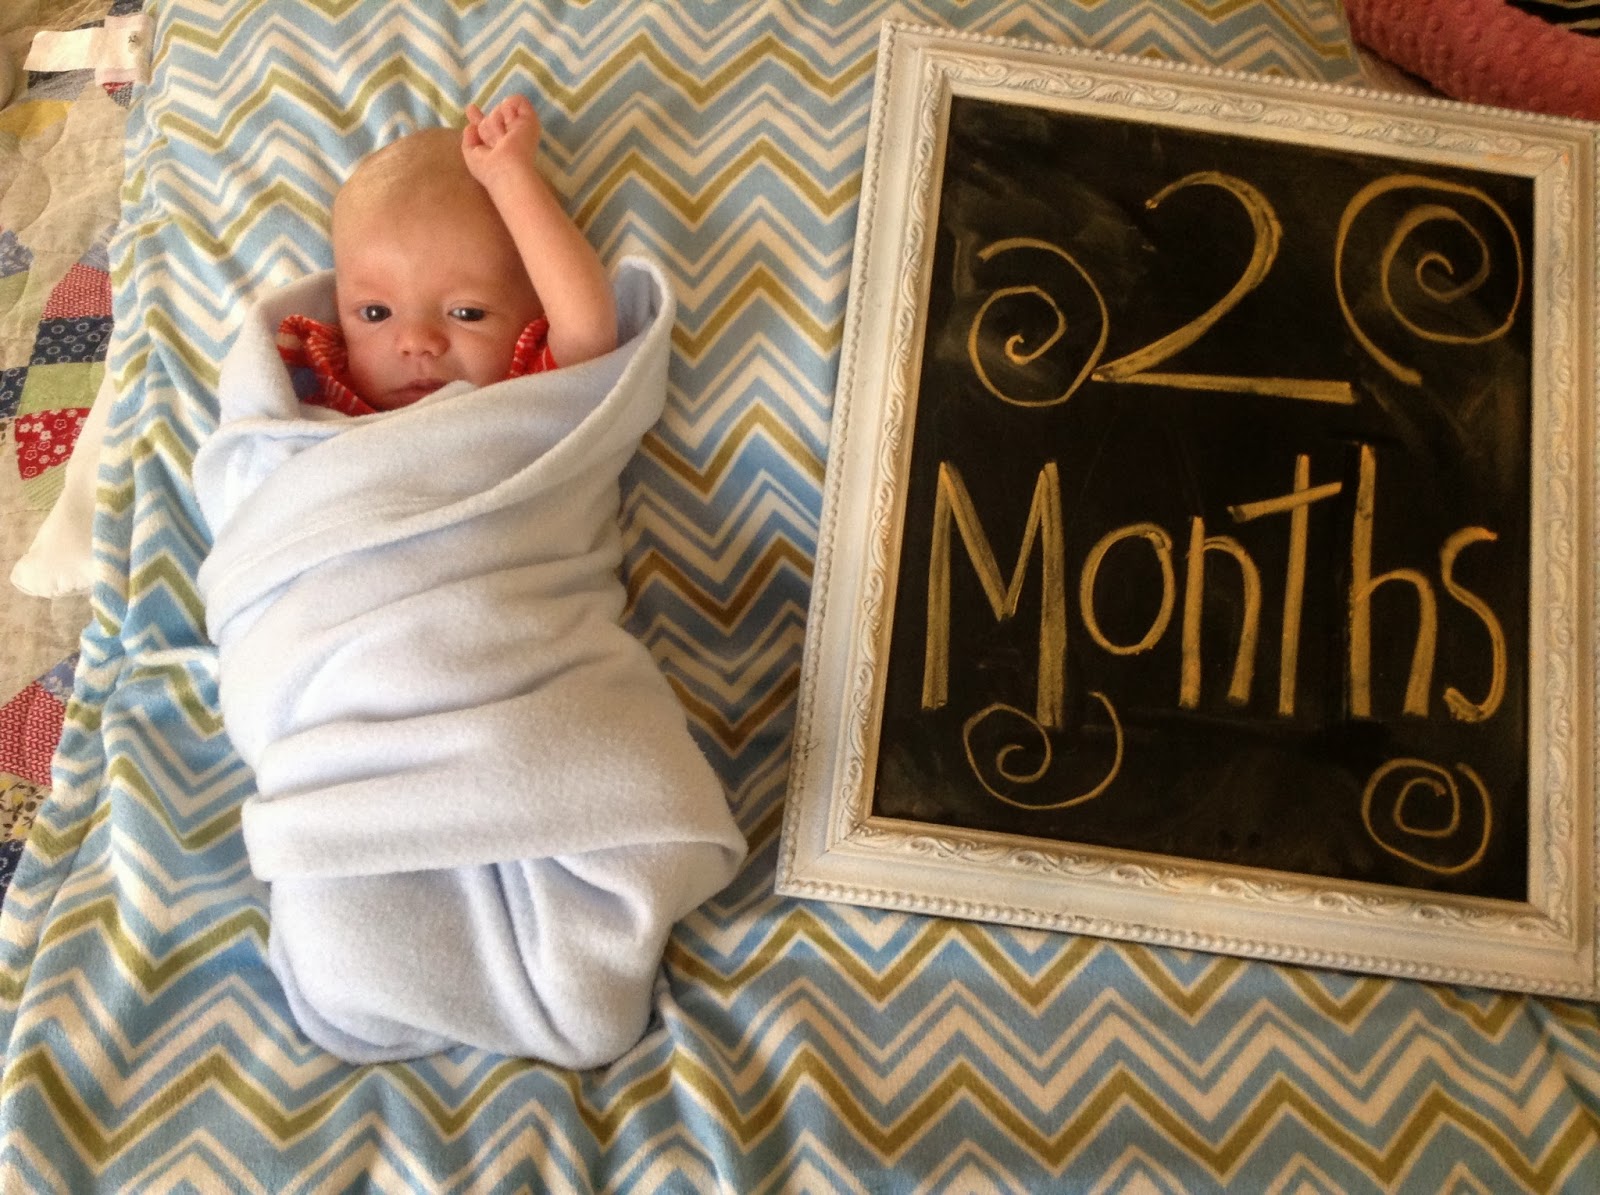 OUR HEART HERO: Happy 2 Months Baby Tyt!